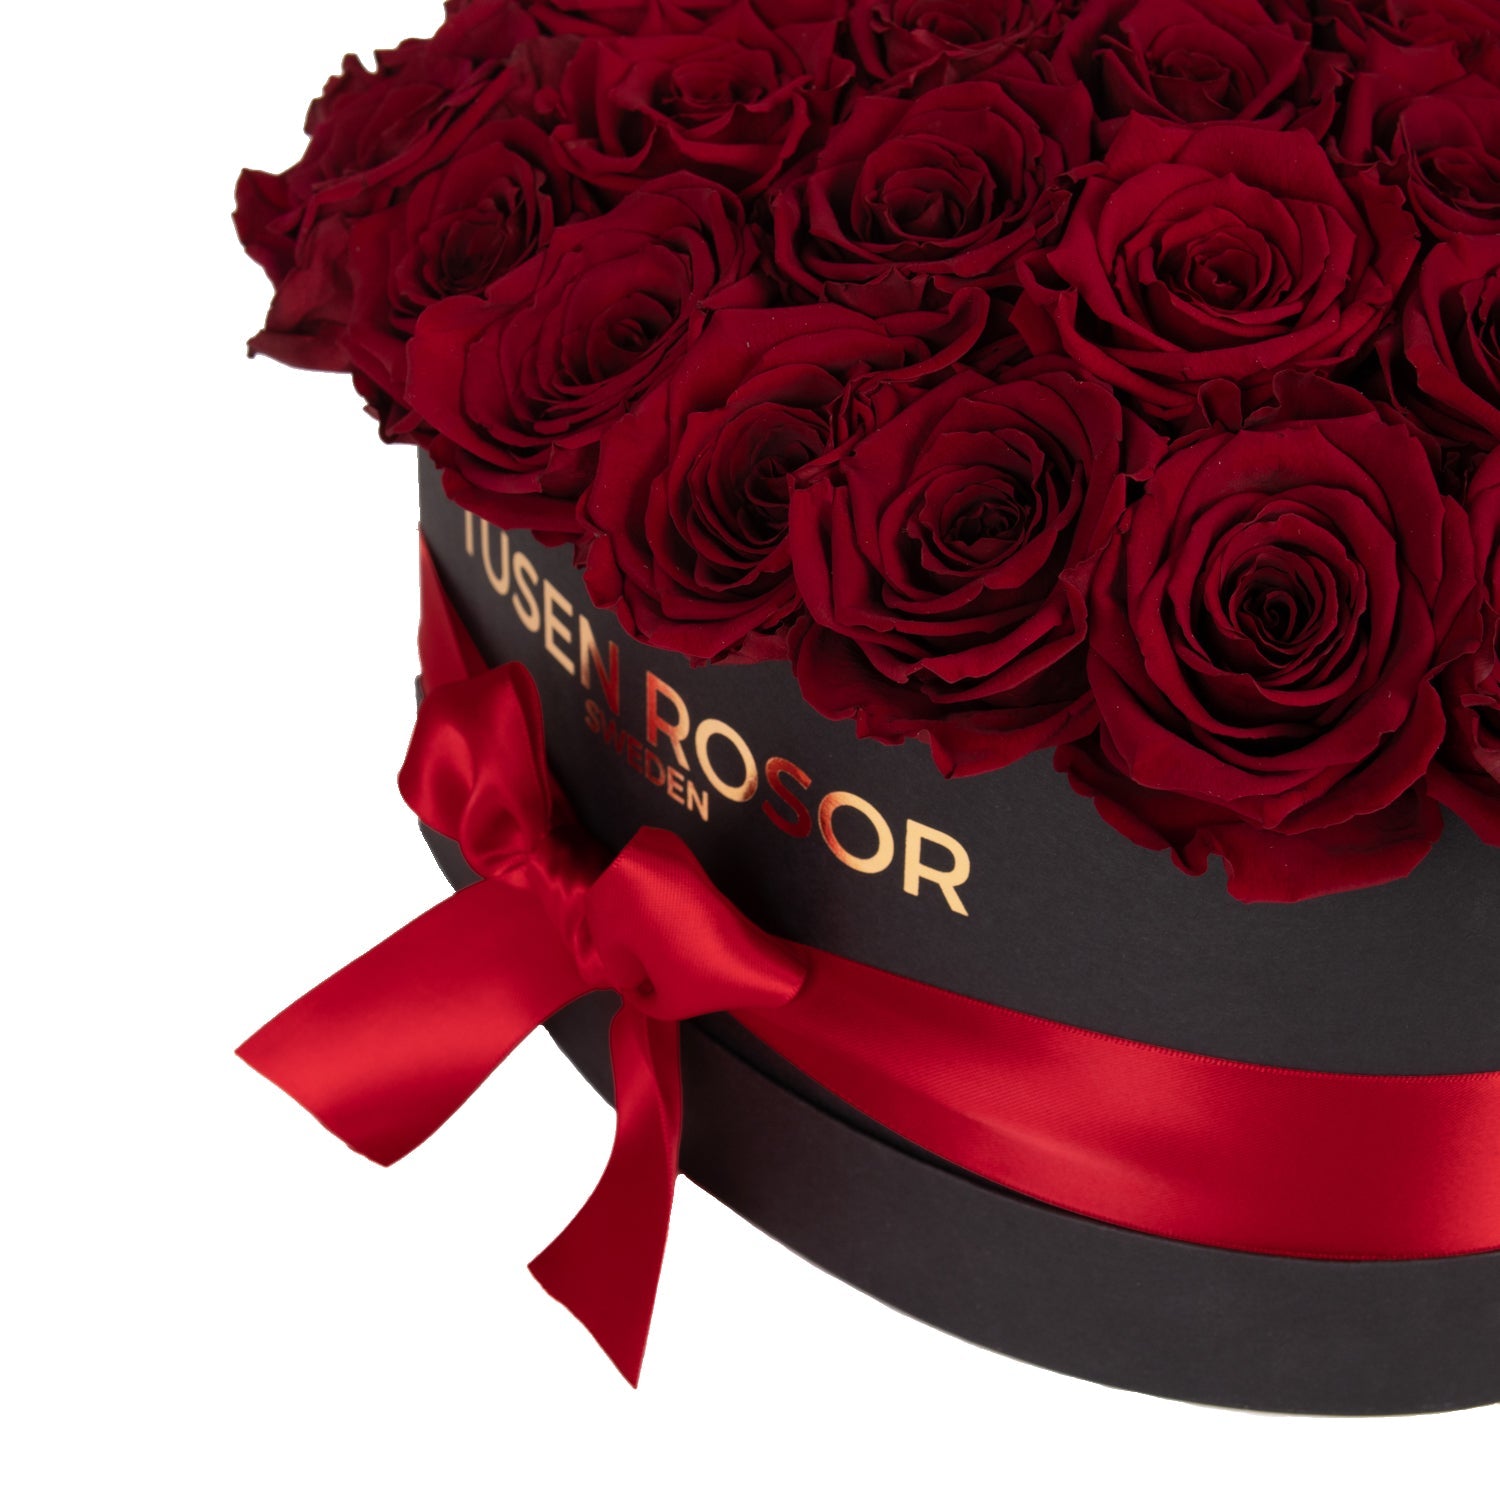 Preserved Roses That Last A Year in A Round Box Valentines Day Rose Box  Forever Flowers Roses Infinity Eternal Flower 